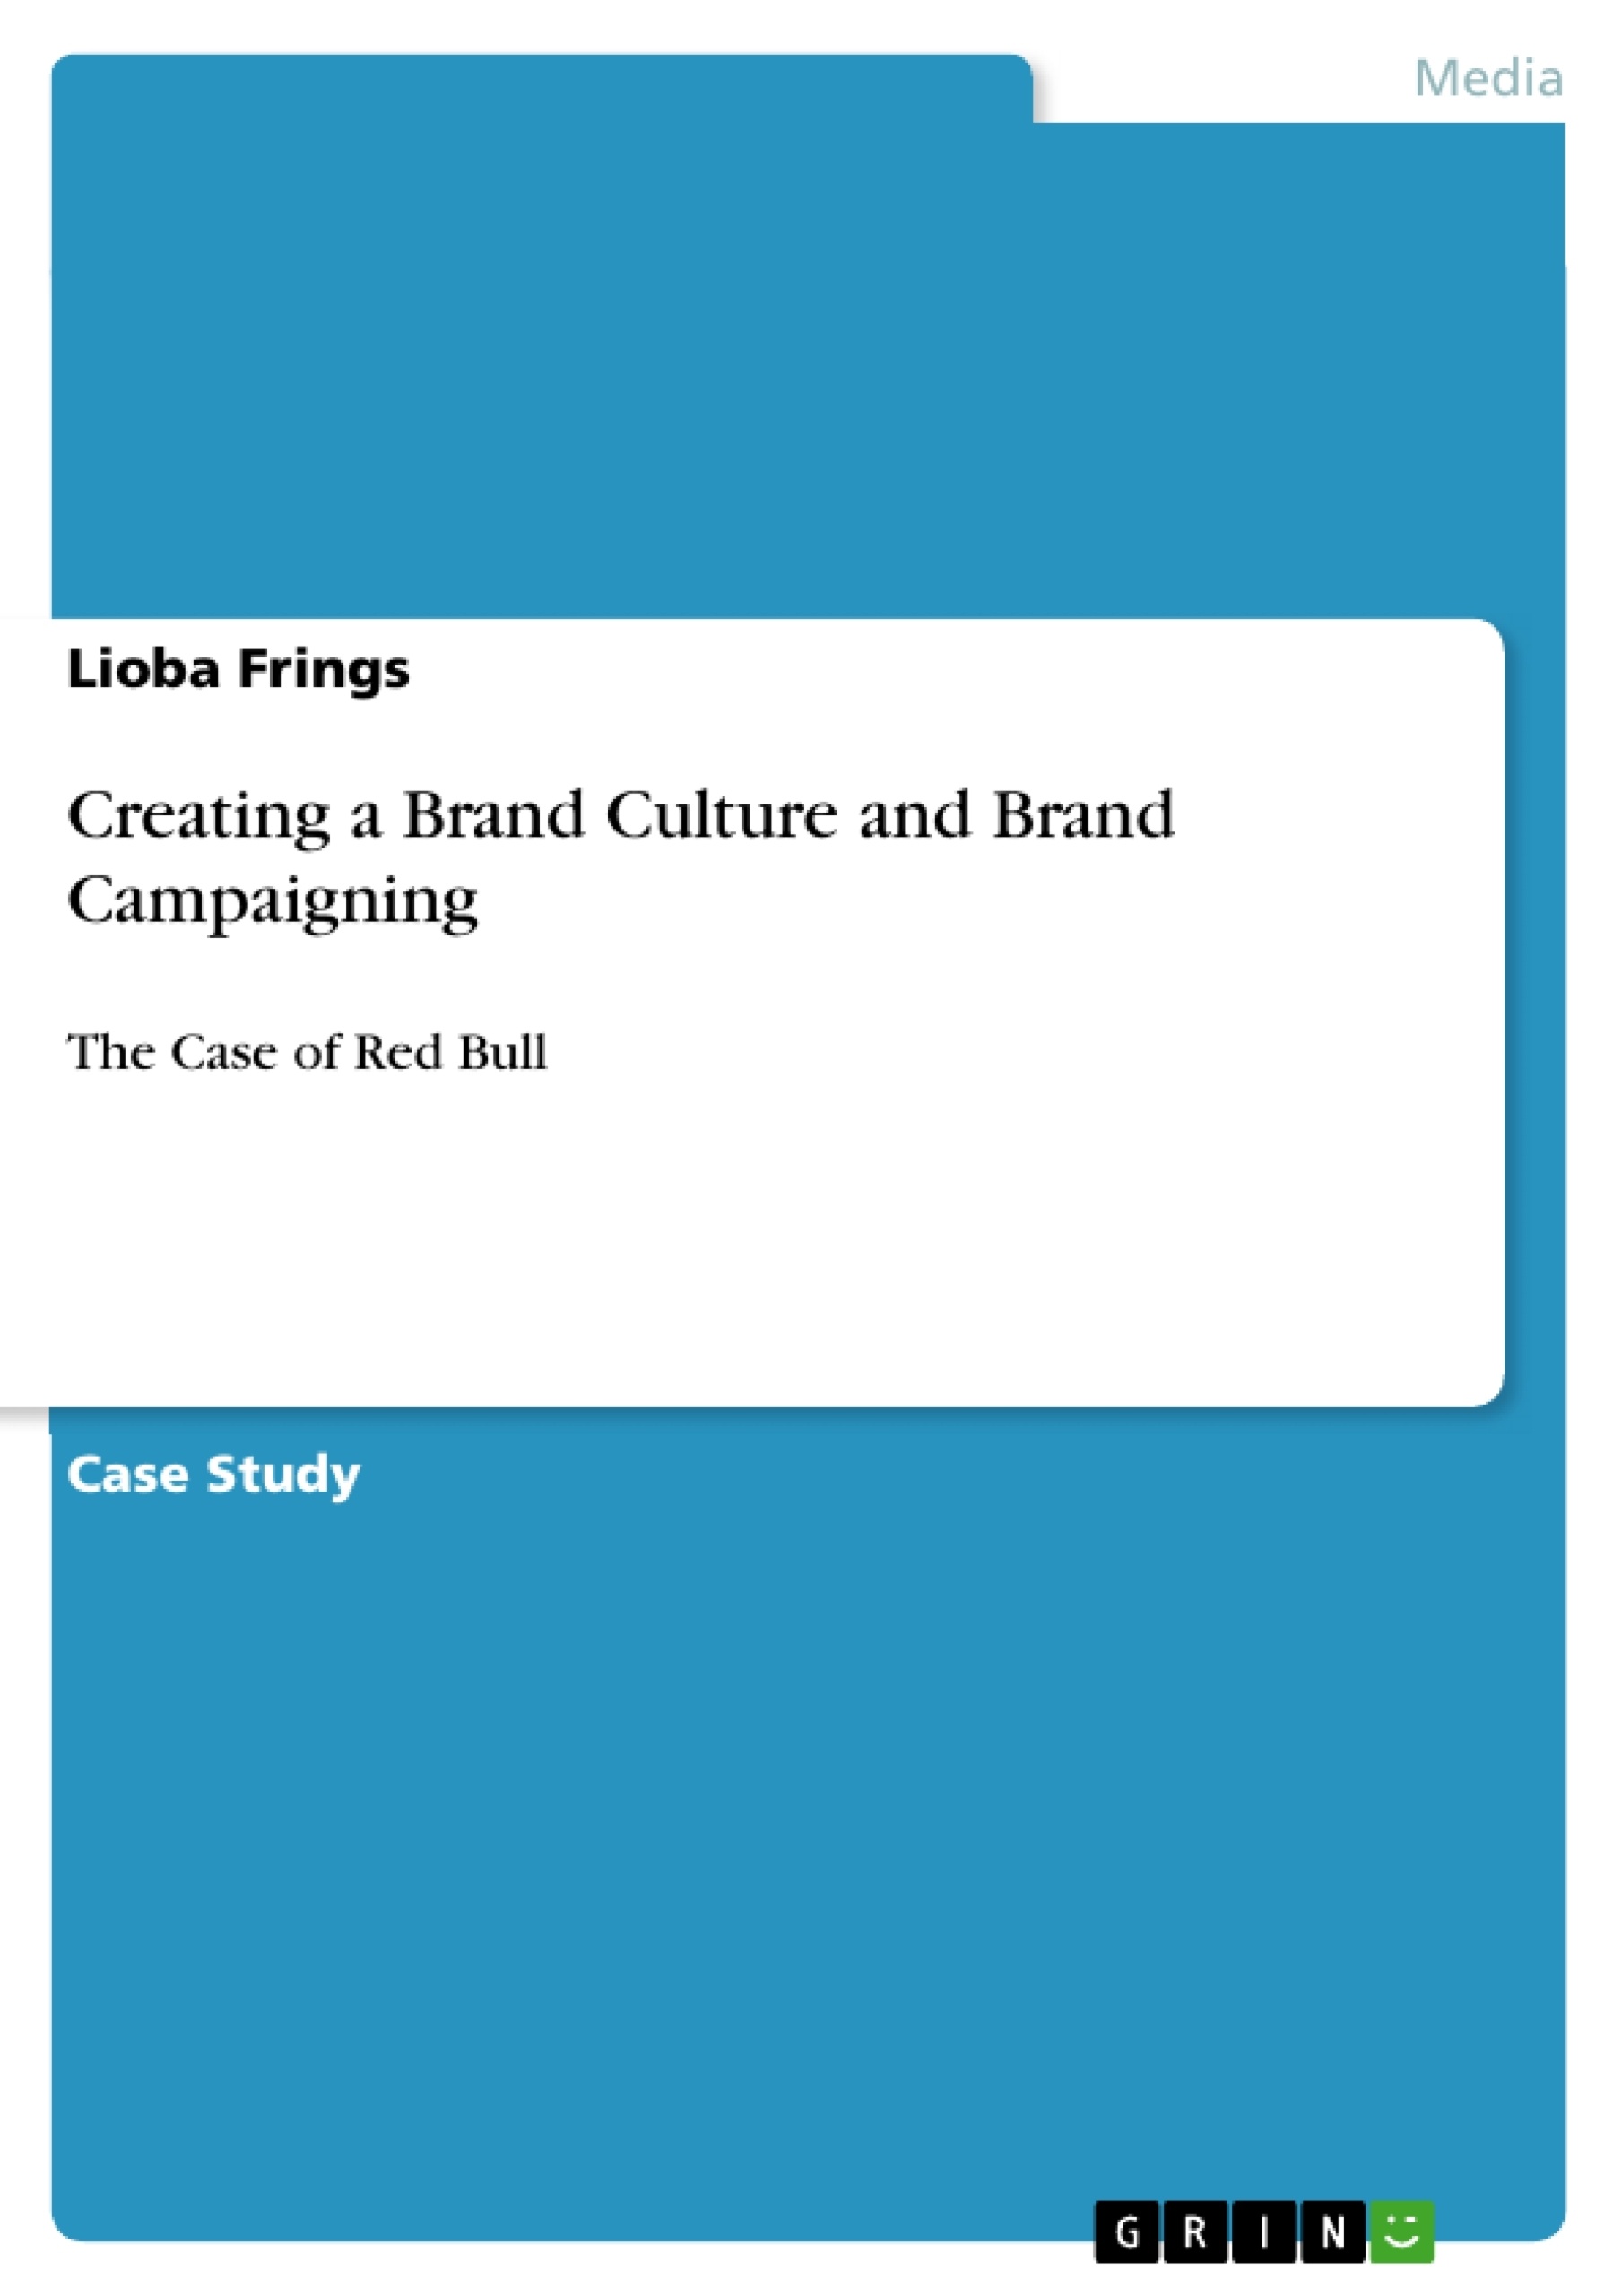 Título: Creating a Brand Culture and Brand Campaigning